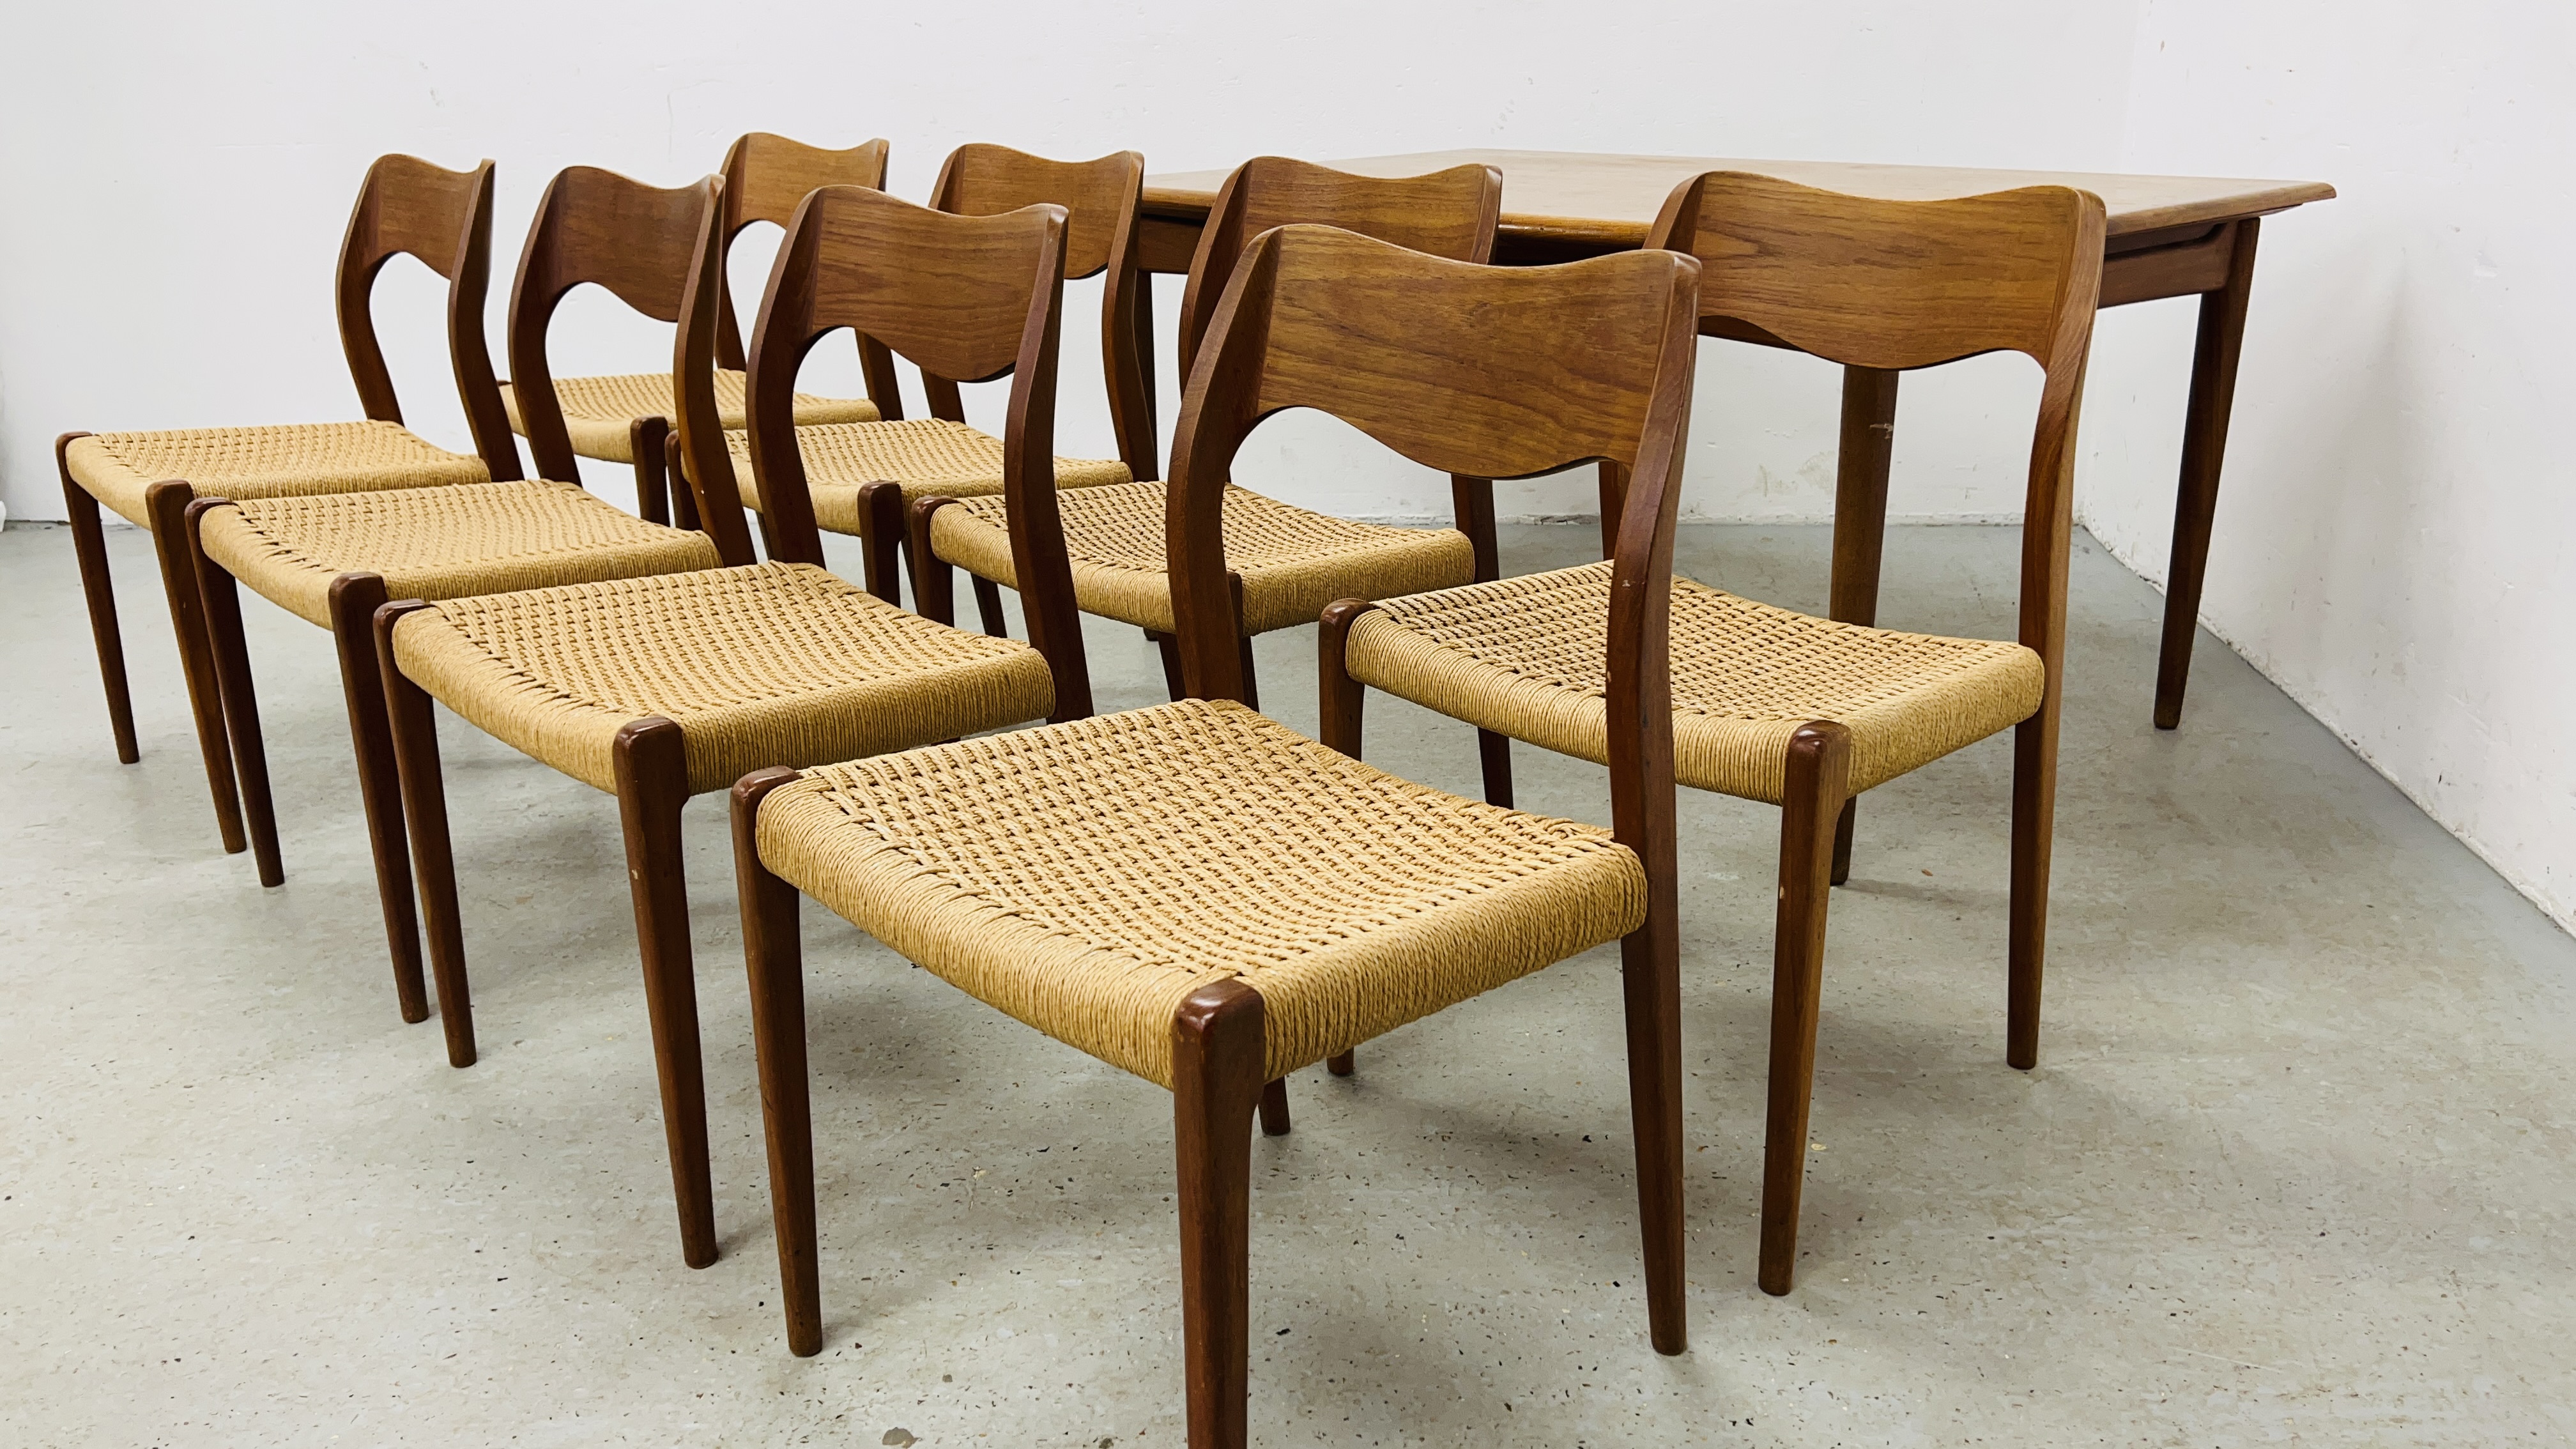 SET OF EIGHT J MOLLER DANISH TEAK DINING CHAIRS WITH WOVEN SISAL SEATS ALONG WITH A DRAWER LEAF - Image 4 of 48